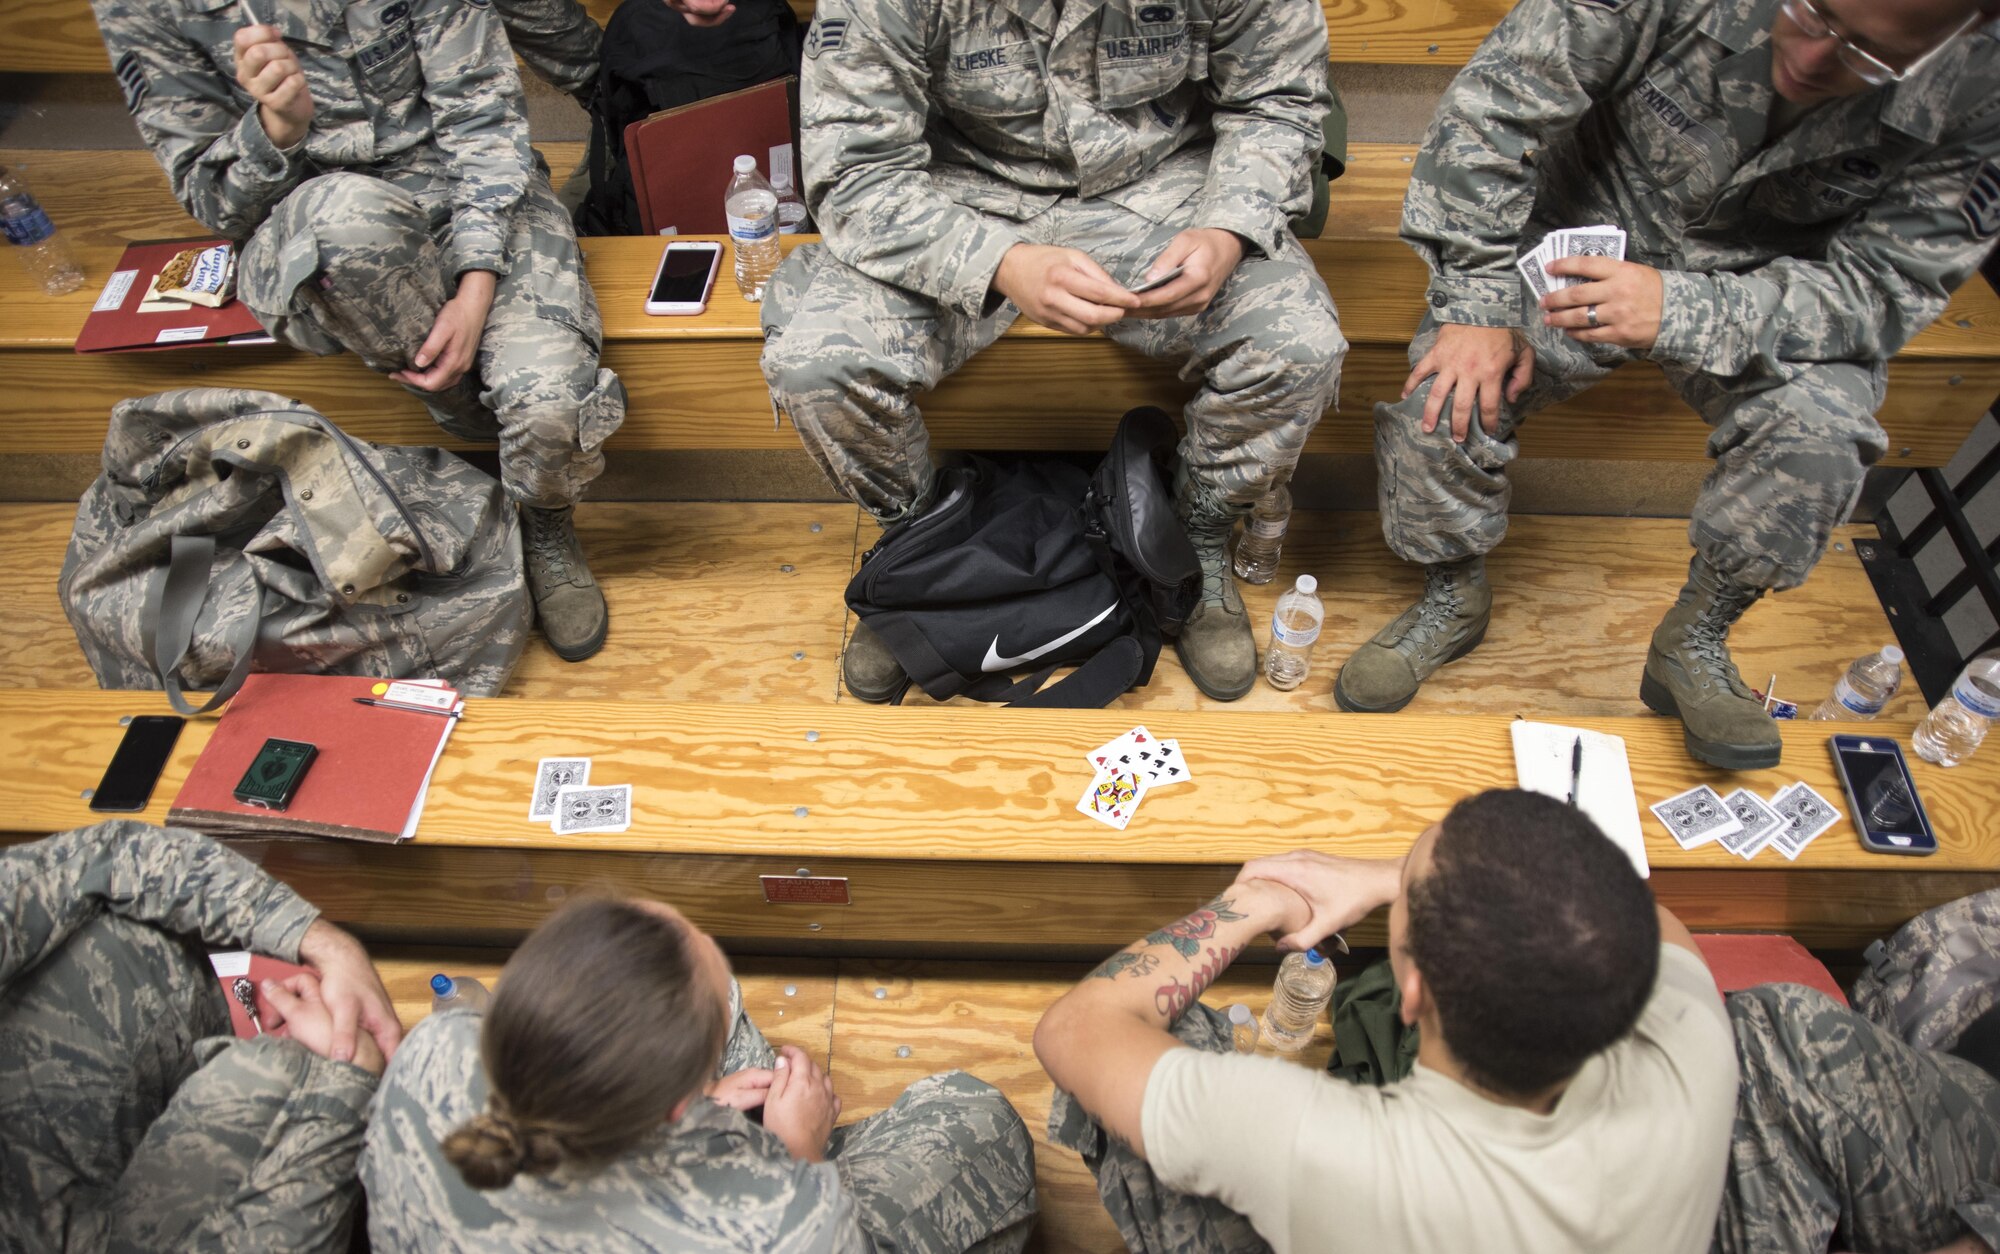 Airmen from the 4th Aircraft Maintenance Squadron play a game of spades while waiting at the pre-deployment function line processing center July 20, 2017, at Seymour Johnson Air Force Base, North Carolina. Airmen watched movies, played games and rested while waiting to be processed through the PDF line. (U.S. Air Force photo by Tech. Sgt. David W. Carbajal)